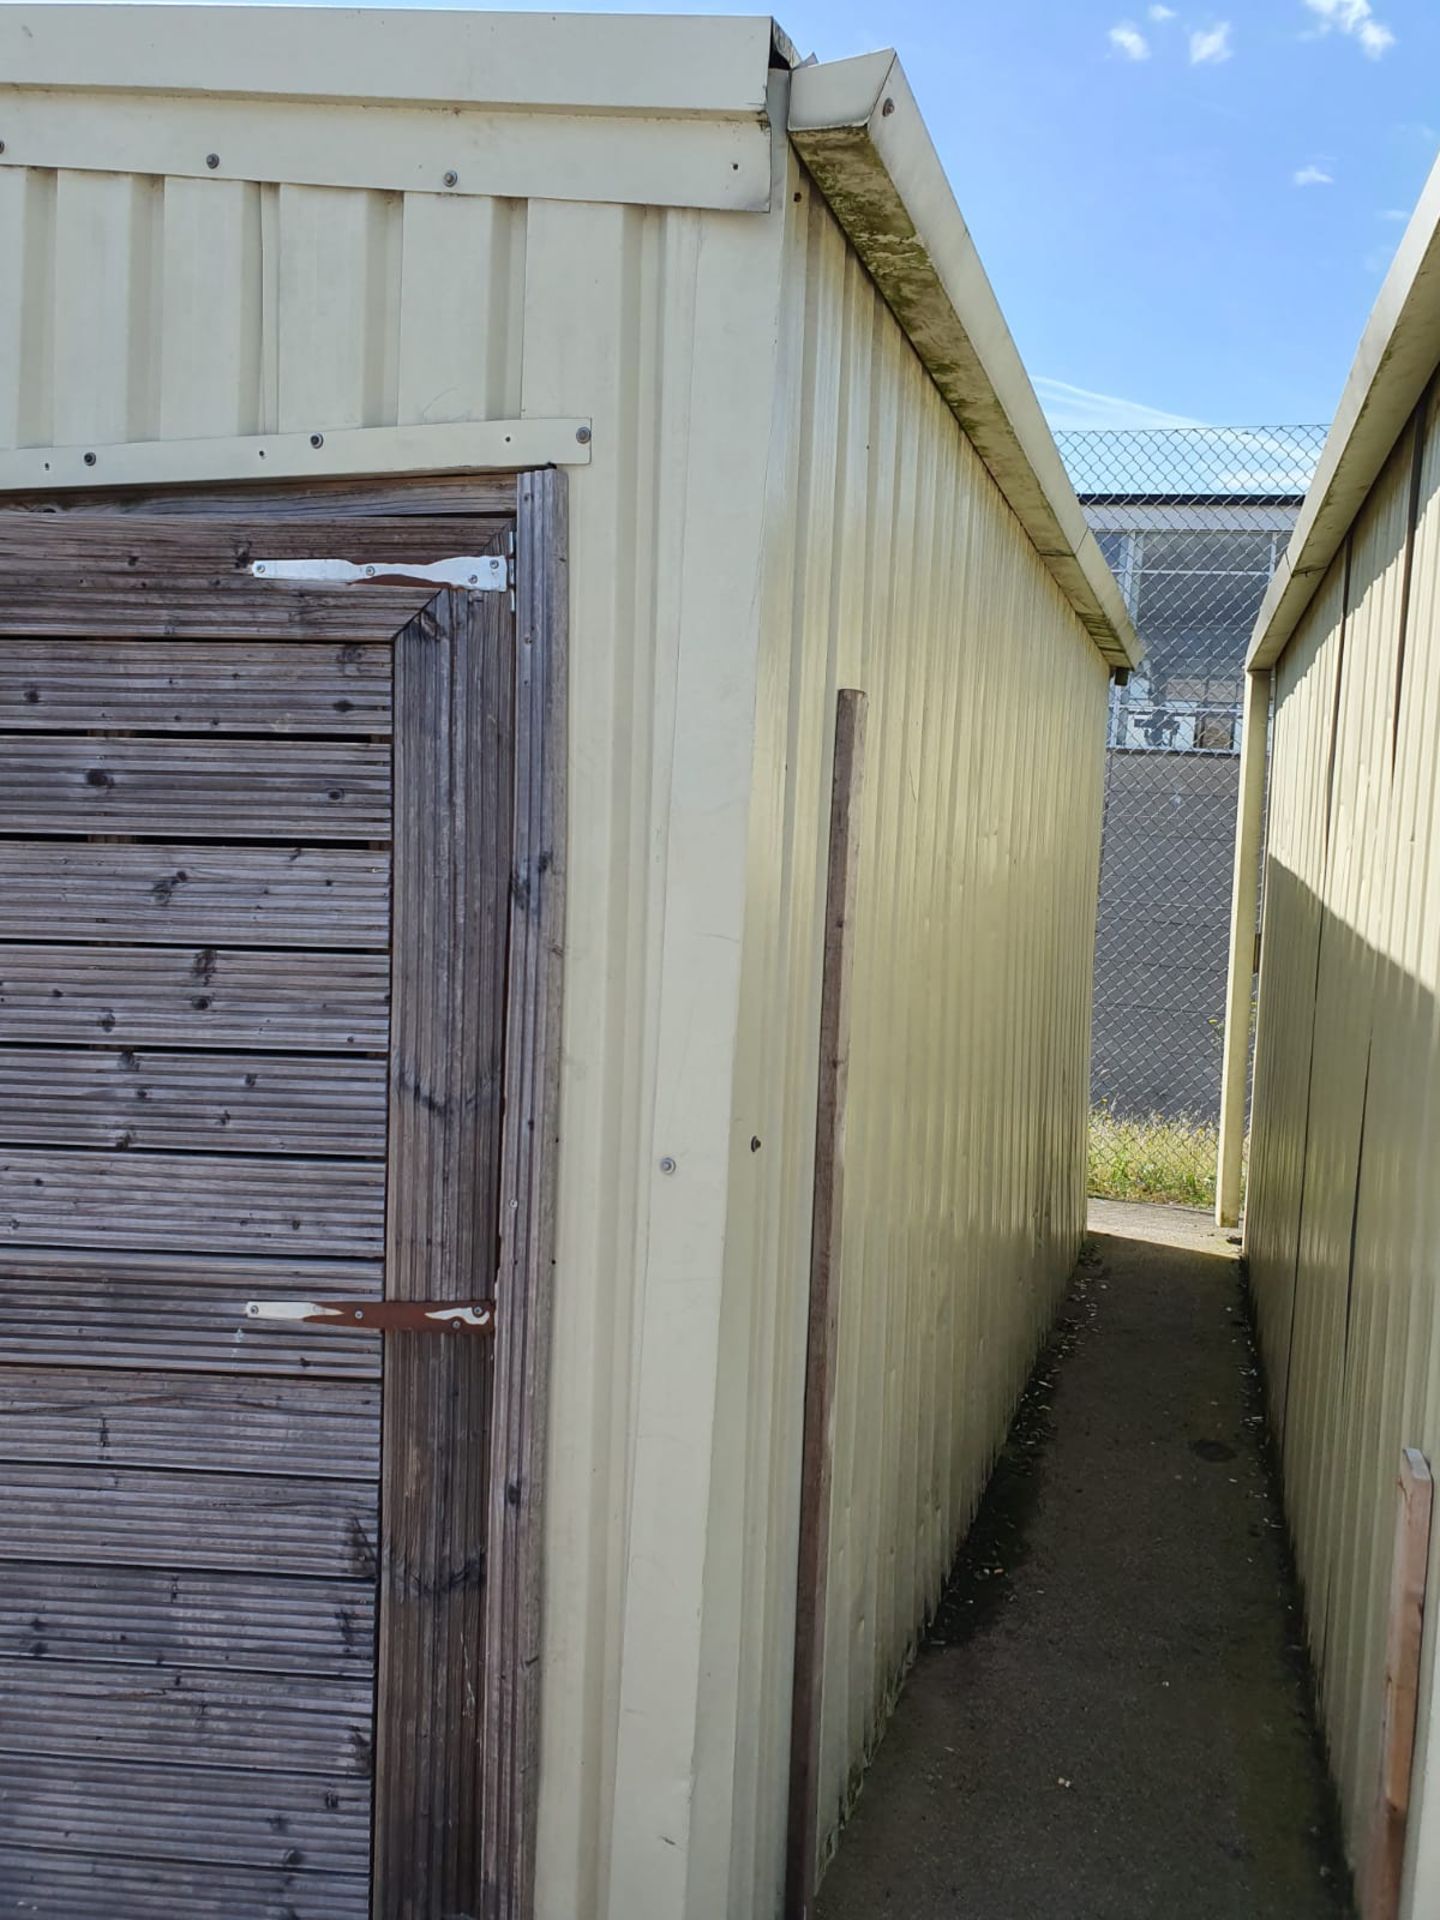 1 x Large Steel Storage Shed Container With Four Wooden Folding Doors - Approx Dimensions 5M x 5M - Image 12 of 16